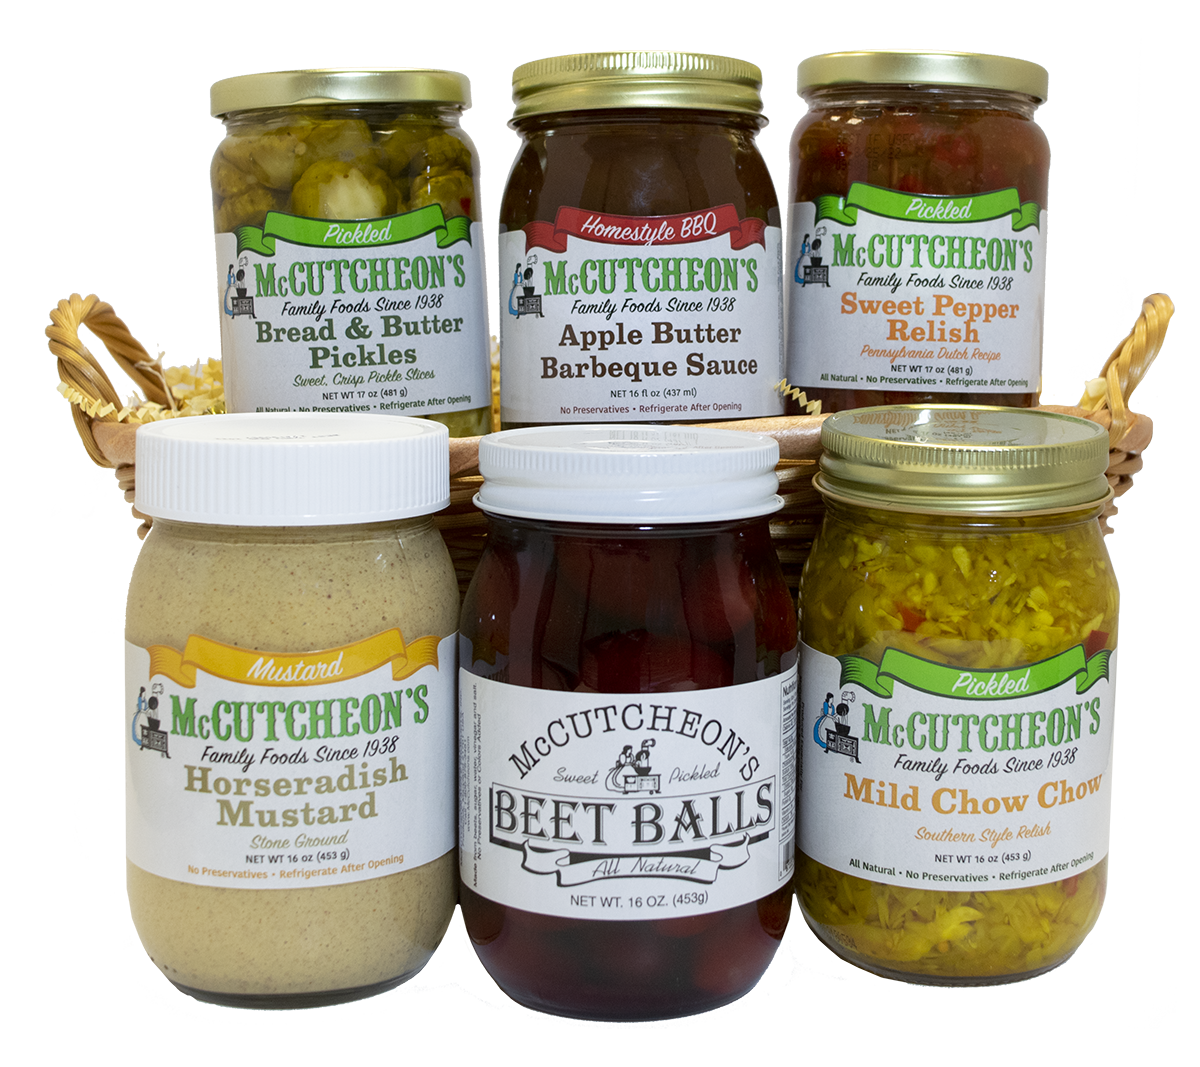 6 jars in a basket including Bread & Butter Pickles, Apple Butter Barbeque Sauce, Sweet Pepper Relish, Horseradish Mustard, Beet Balls, and Mild Chow Chow